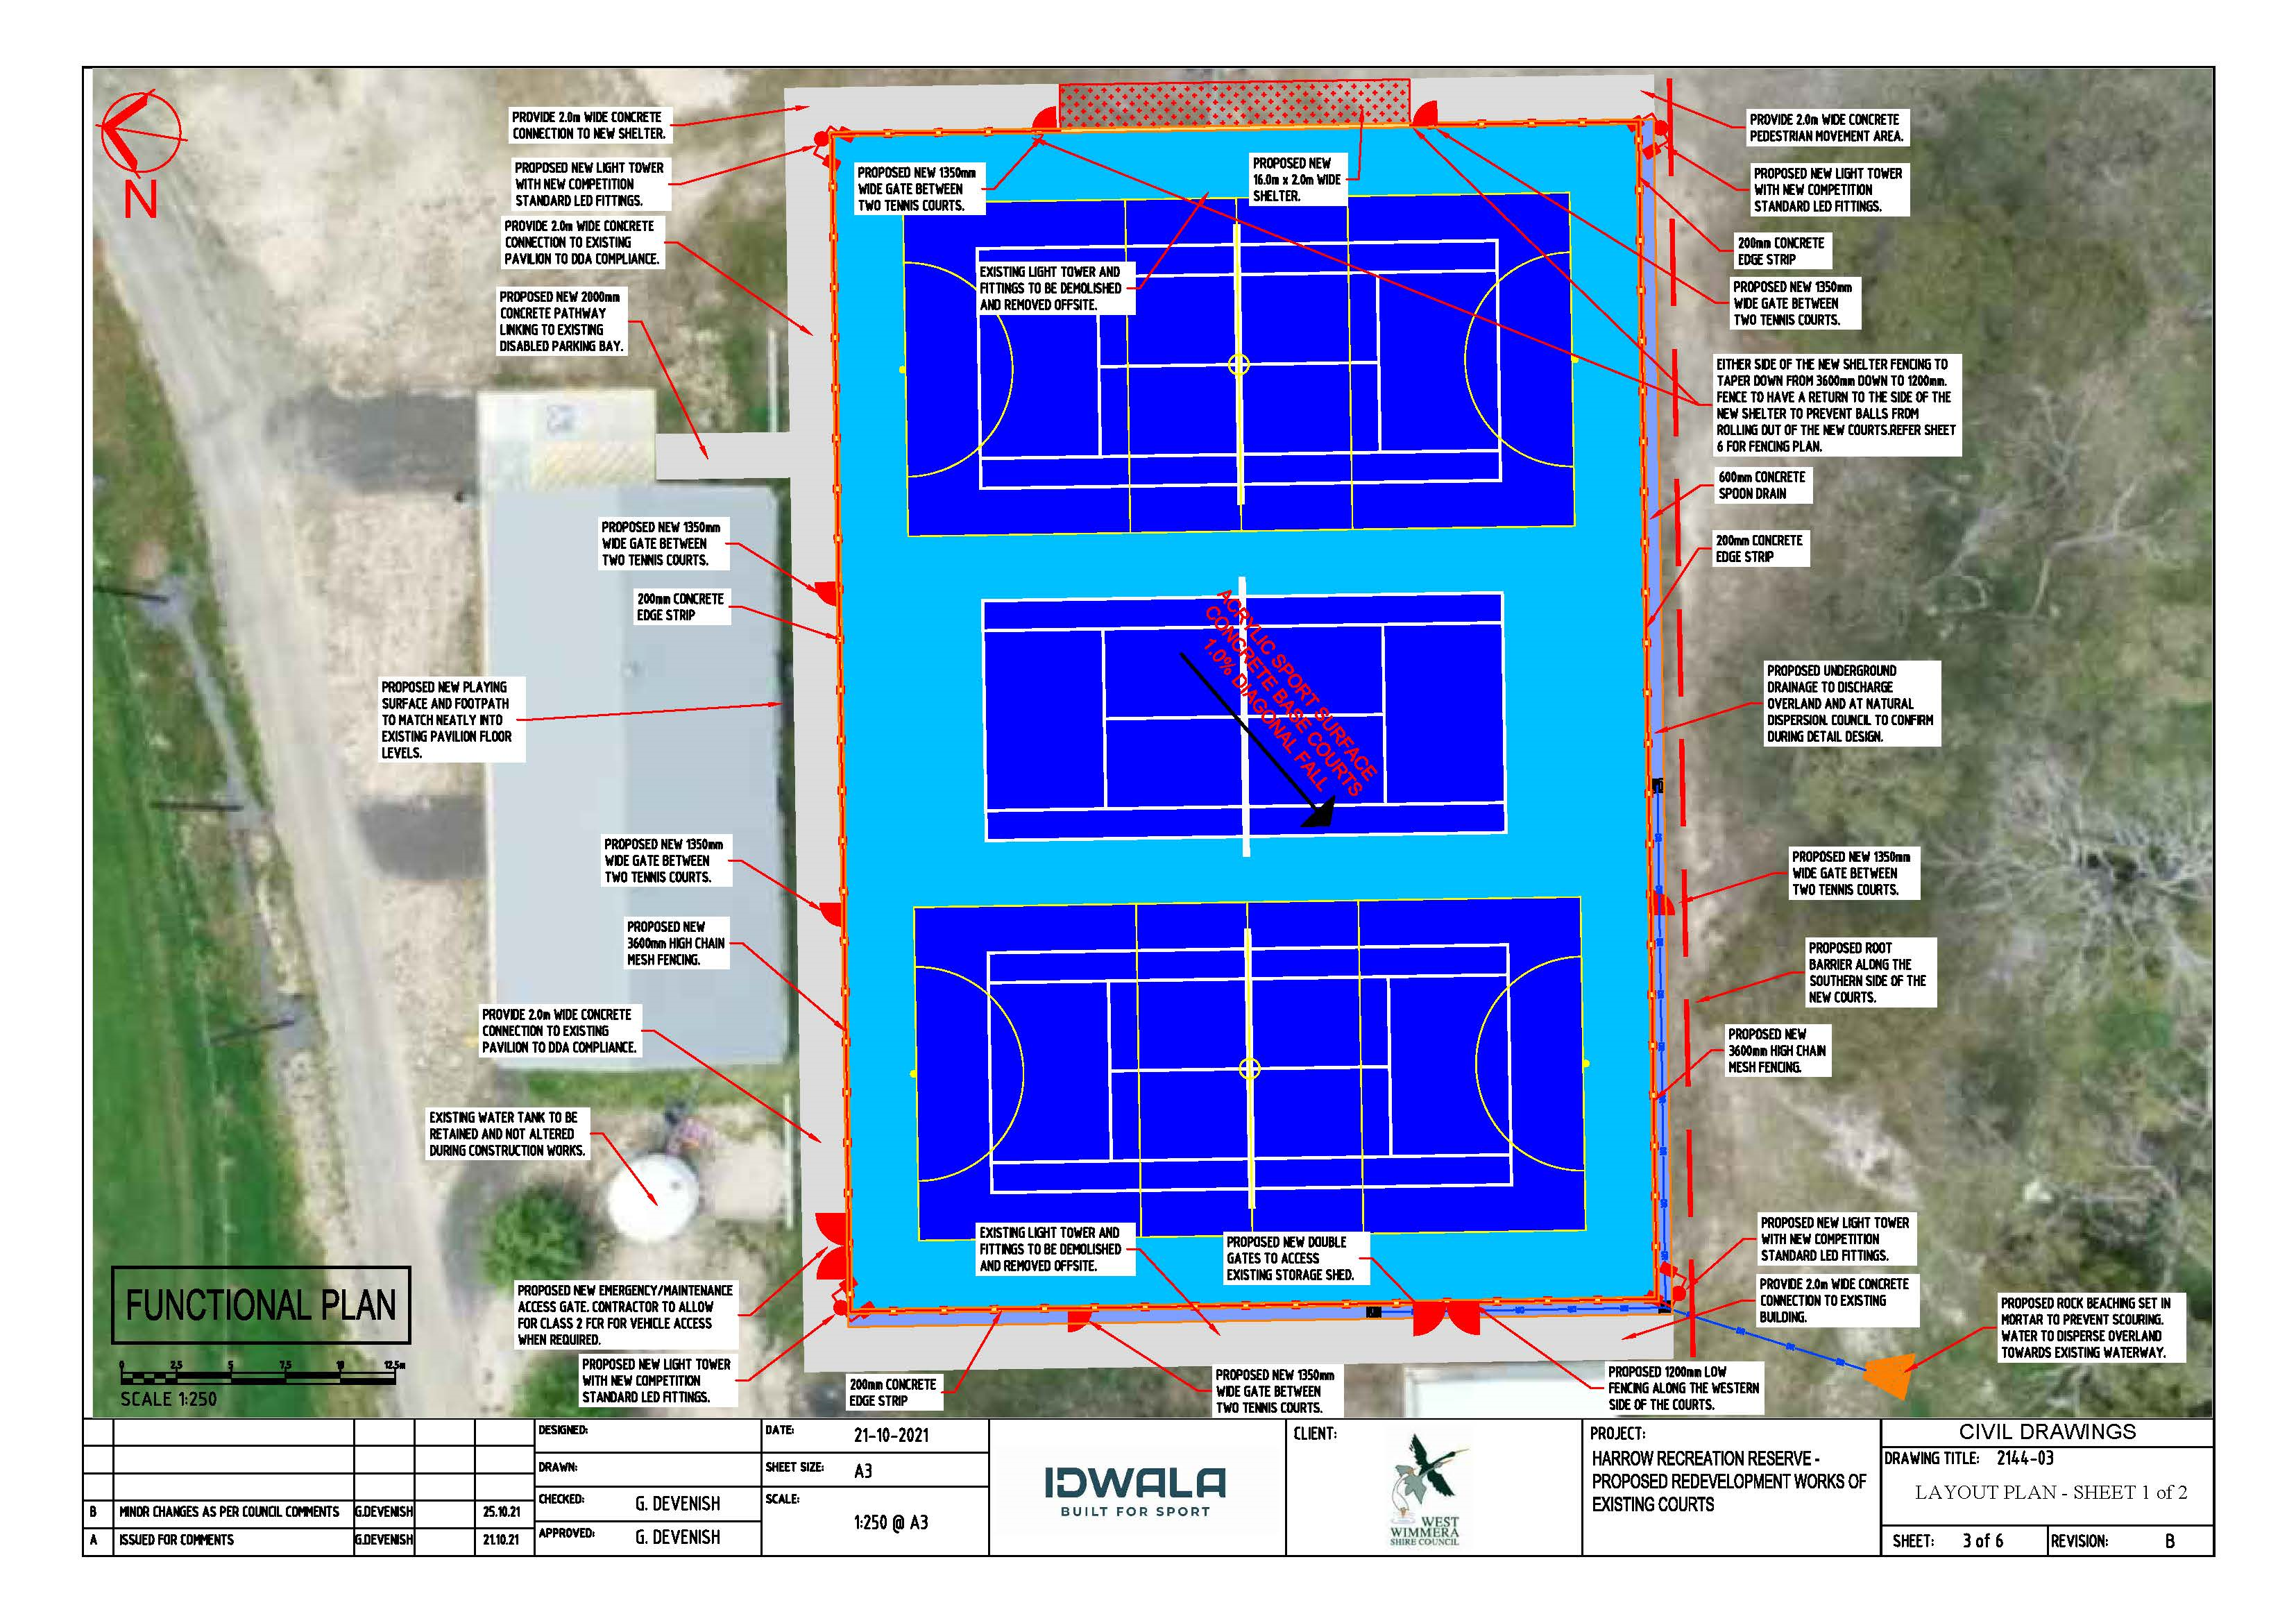 01-Harrow-Rec-Reserve-Netball-Tennis-Courts-Sh-1-to-6 (3).png